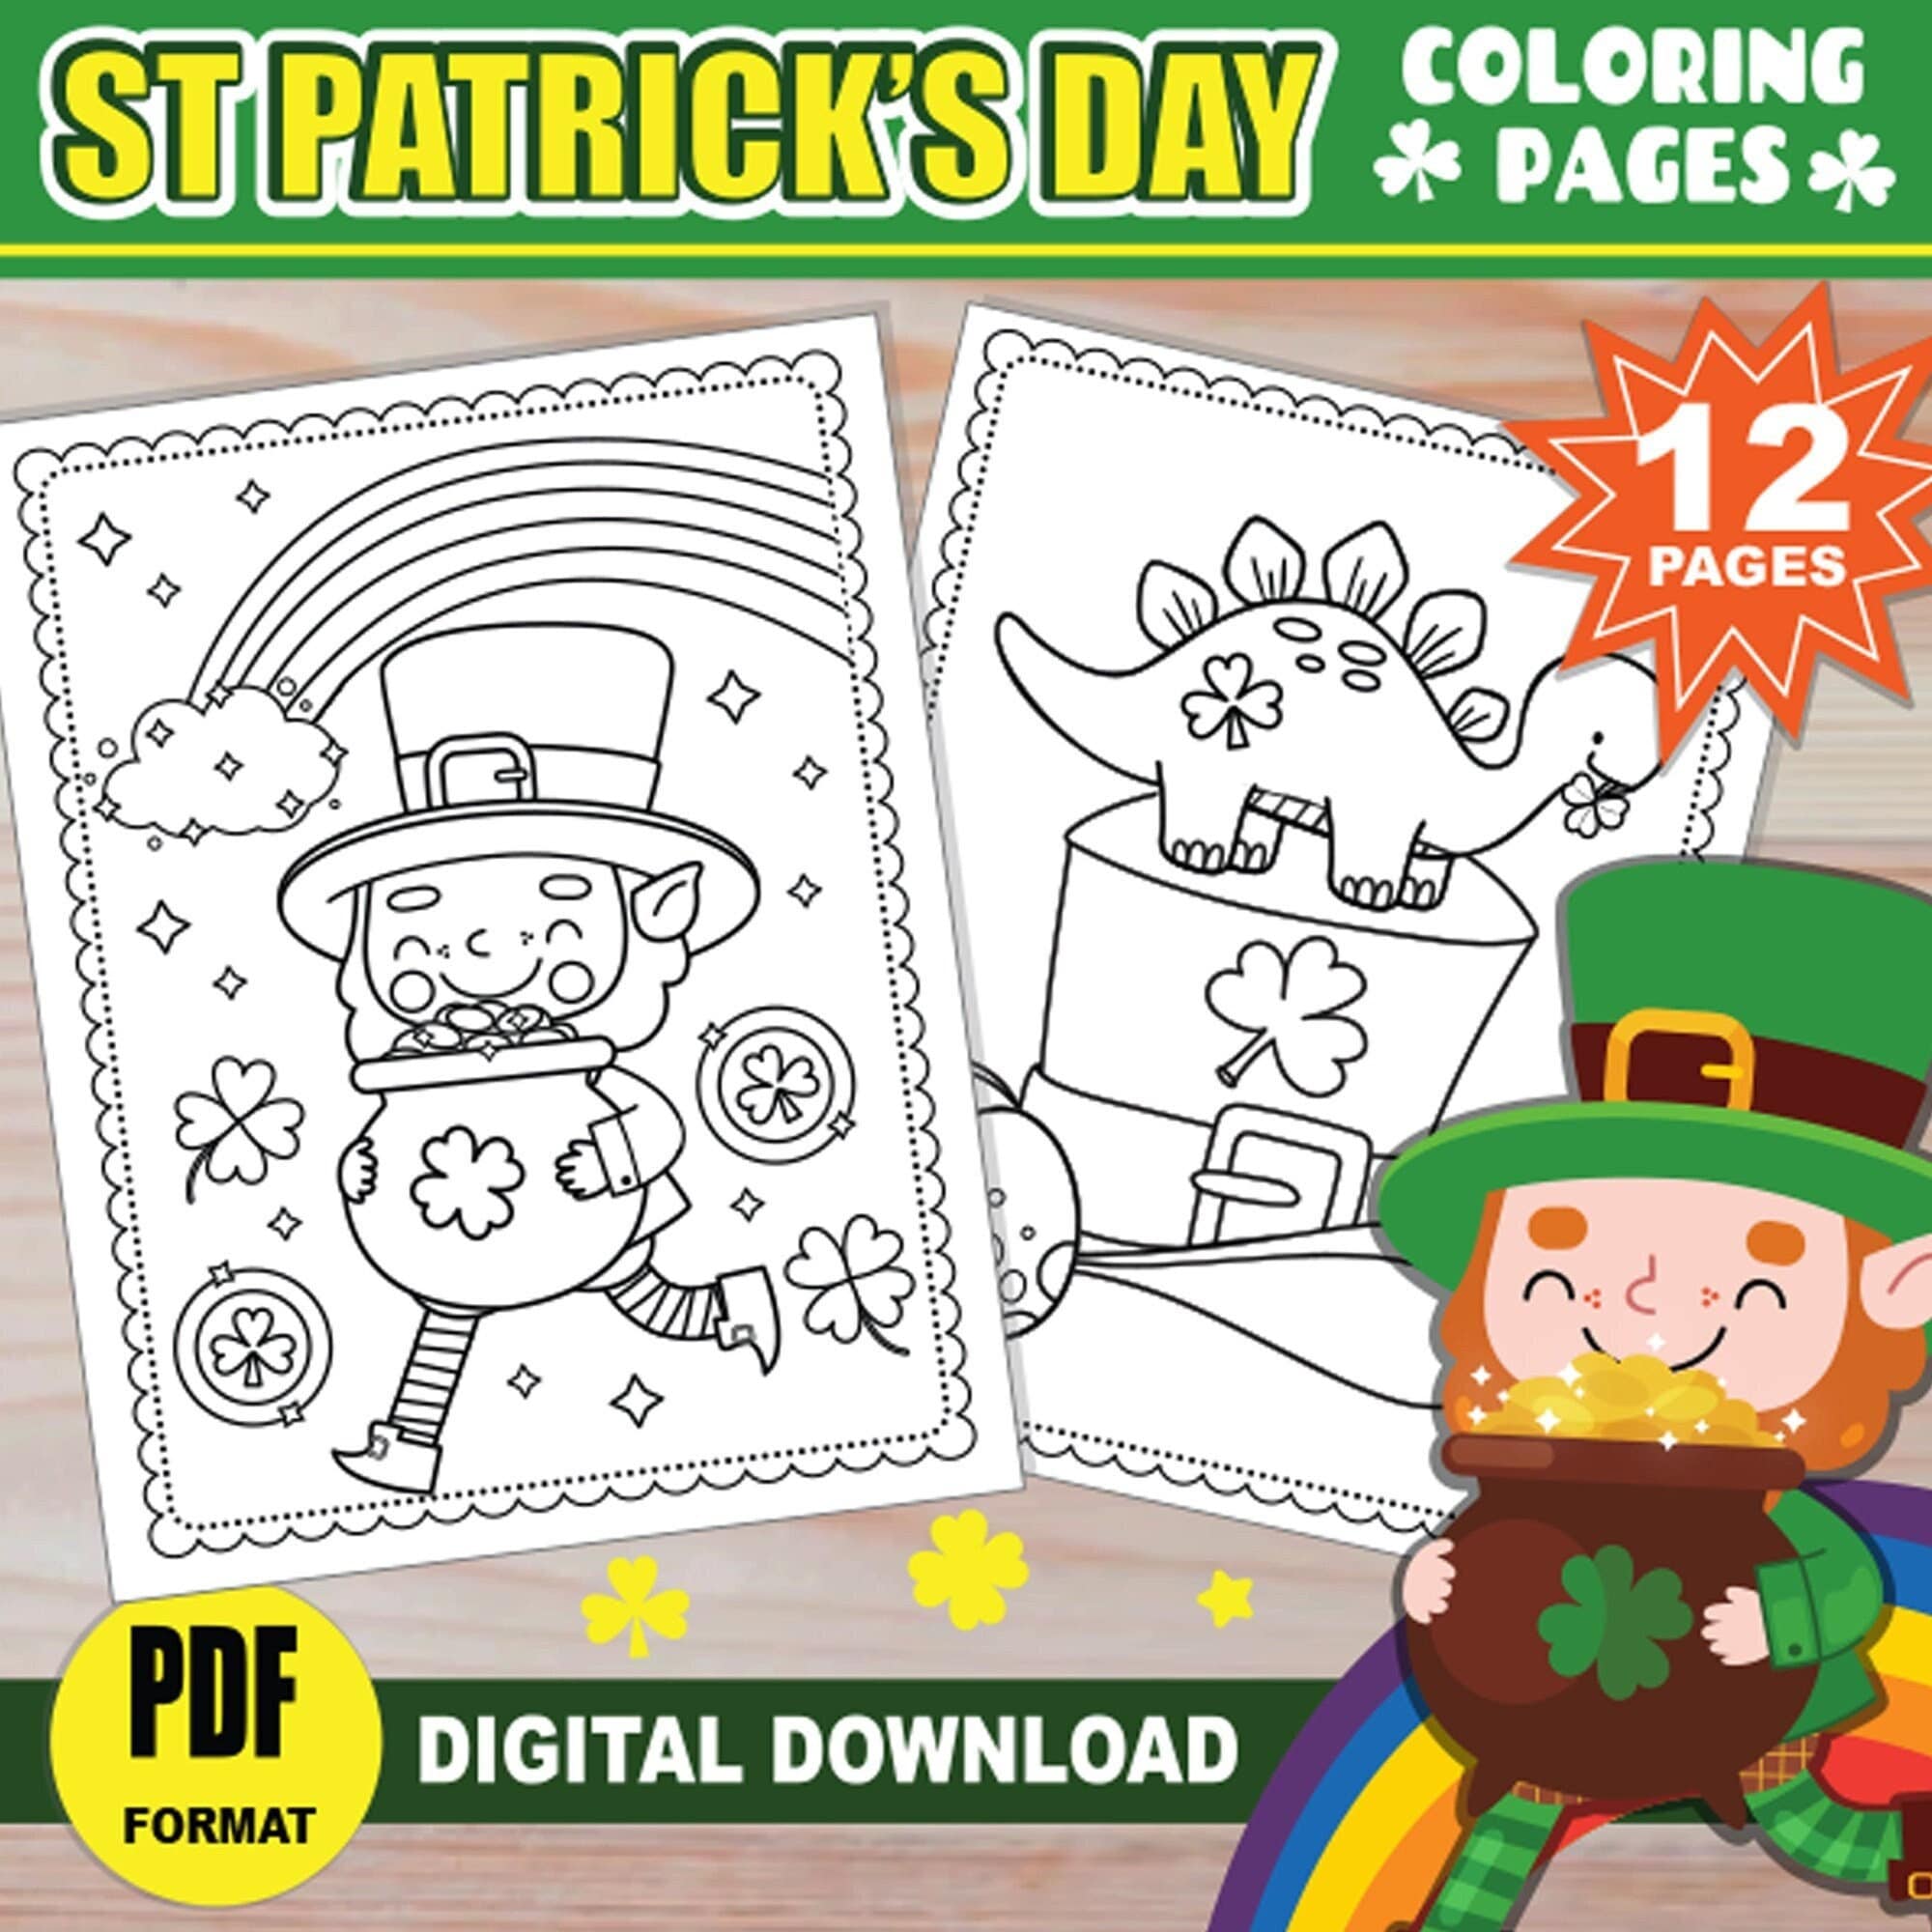 St patricks day coloring pages for kids unique pages printable st patricks activities for children